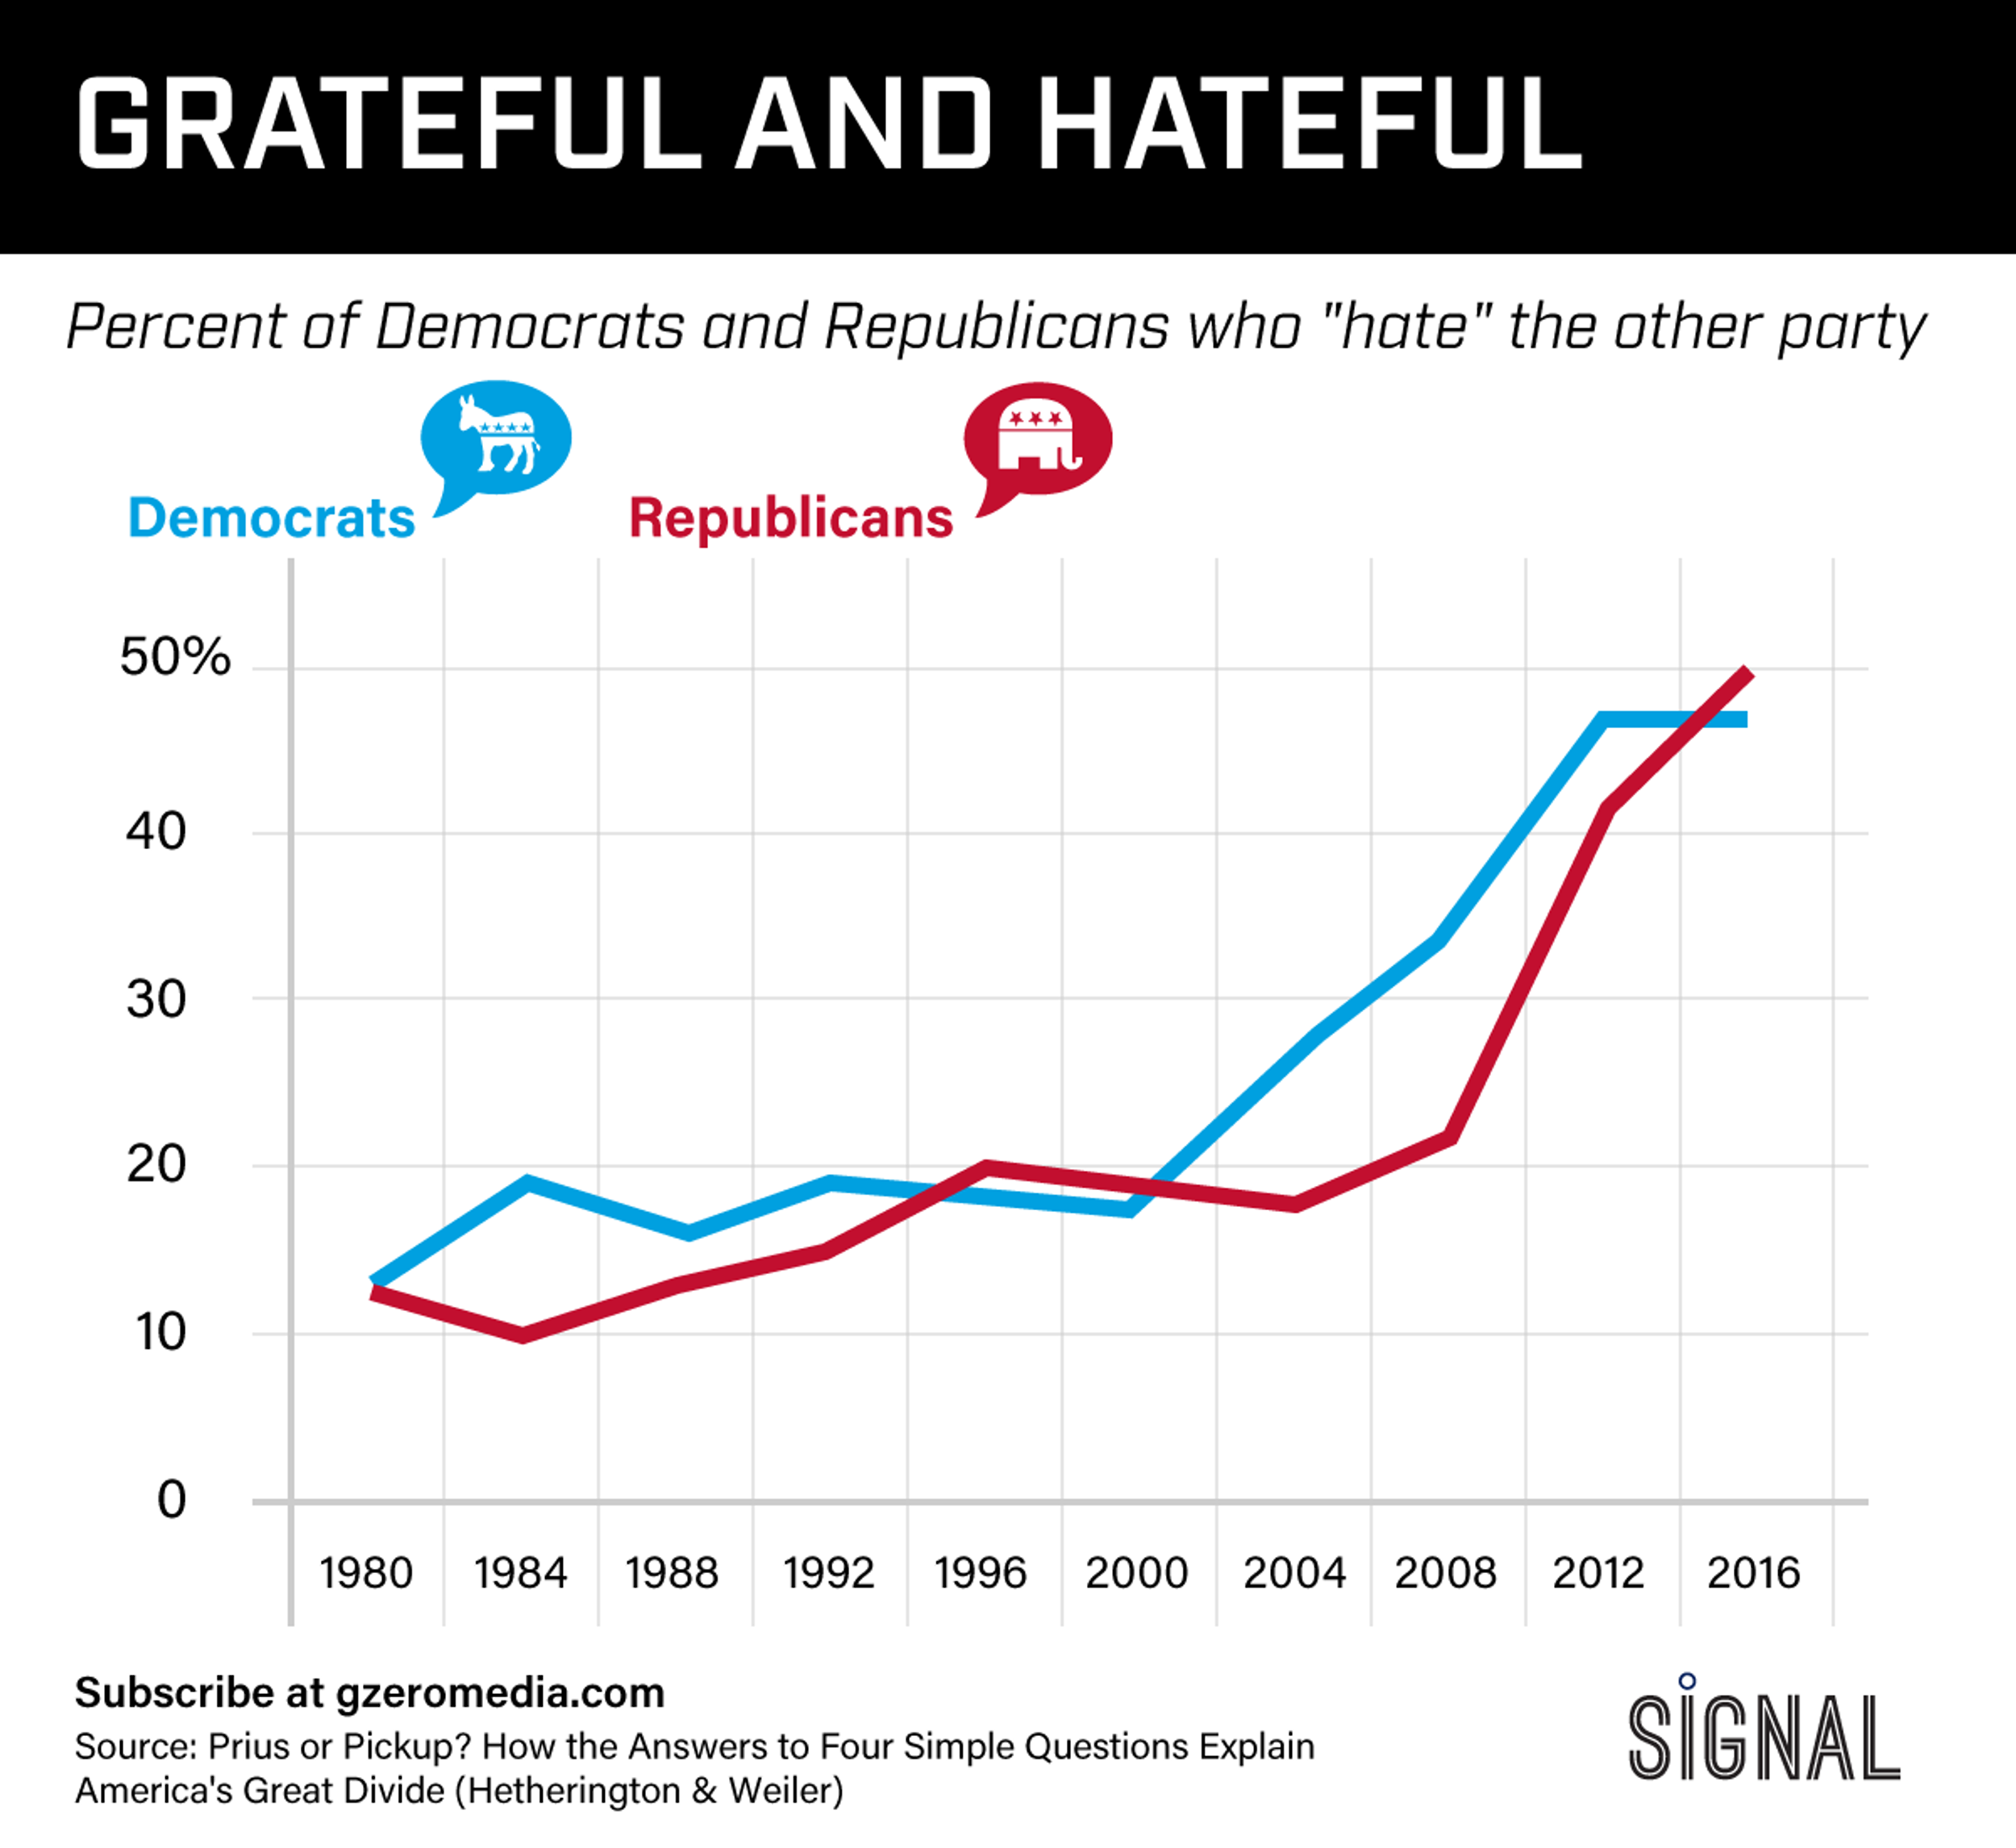 GRAPHIC TRUTH: GRATEFUL AND HATEFUL